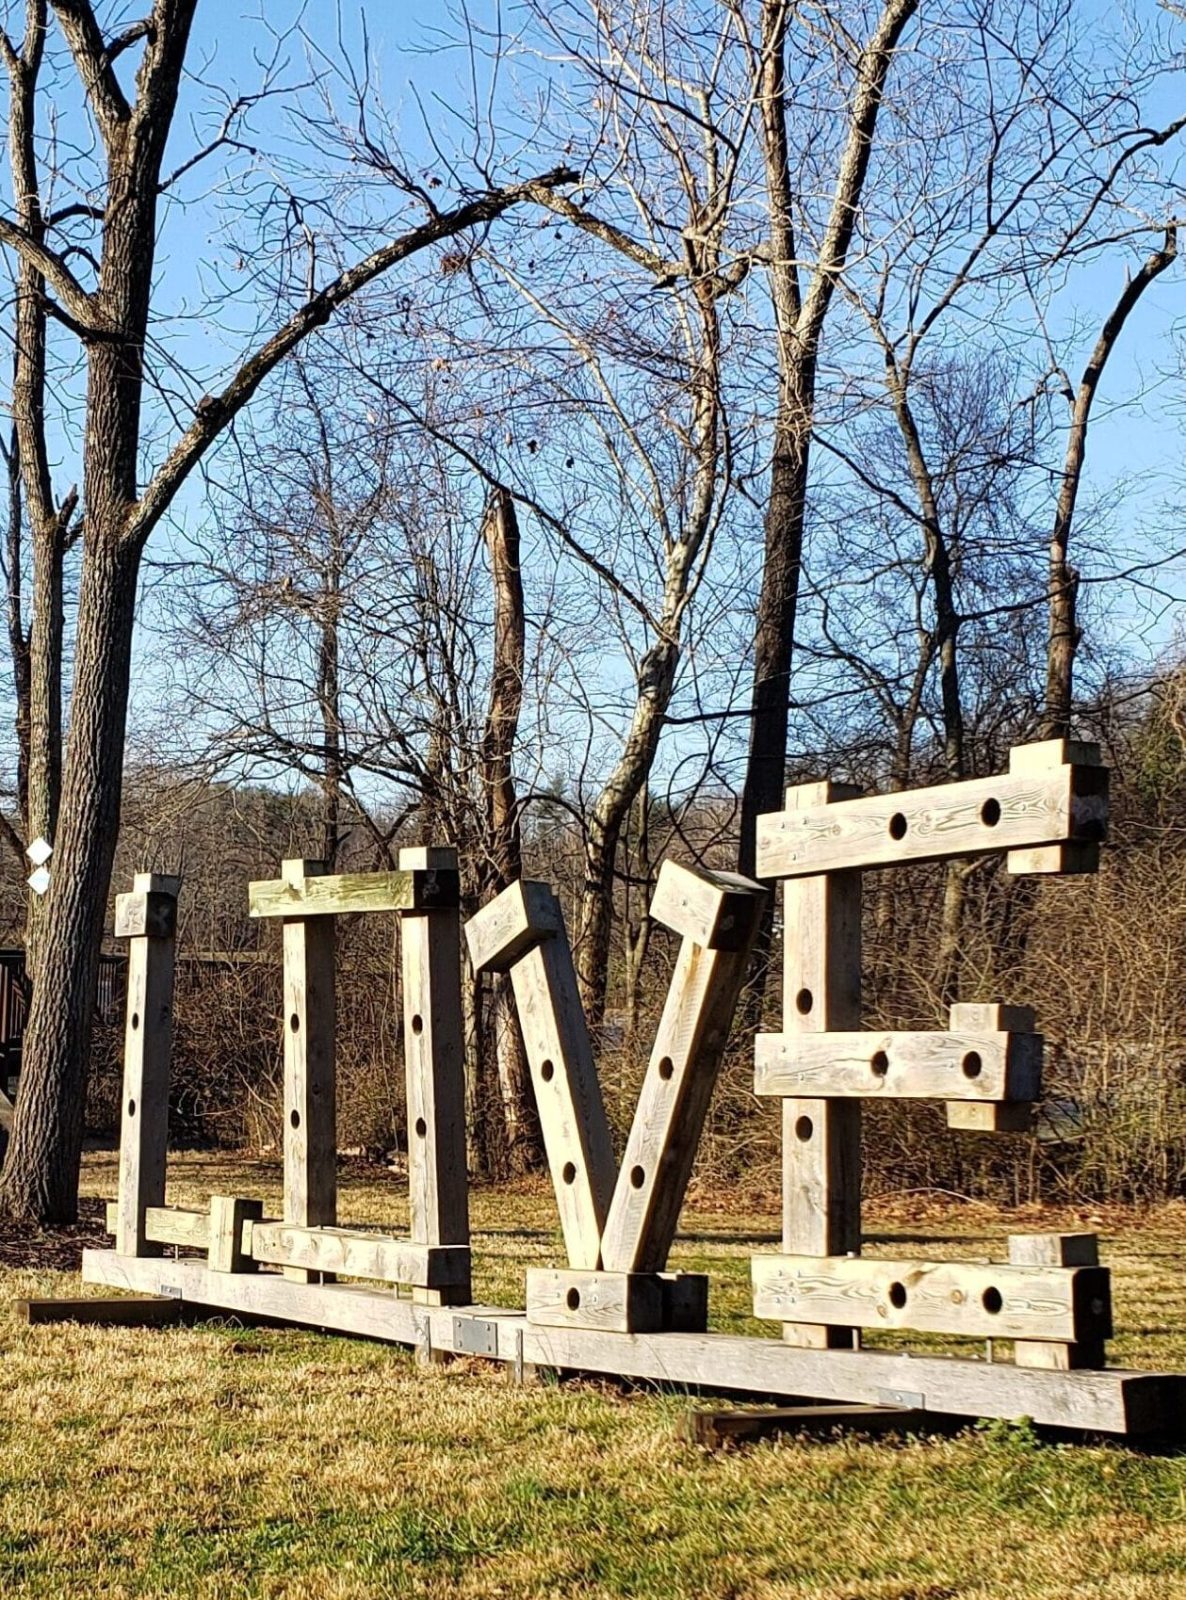 Franklin County's "Love" sign in Waid Park